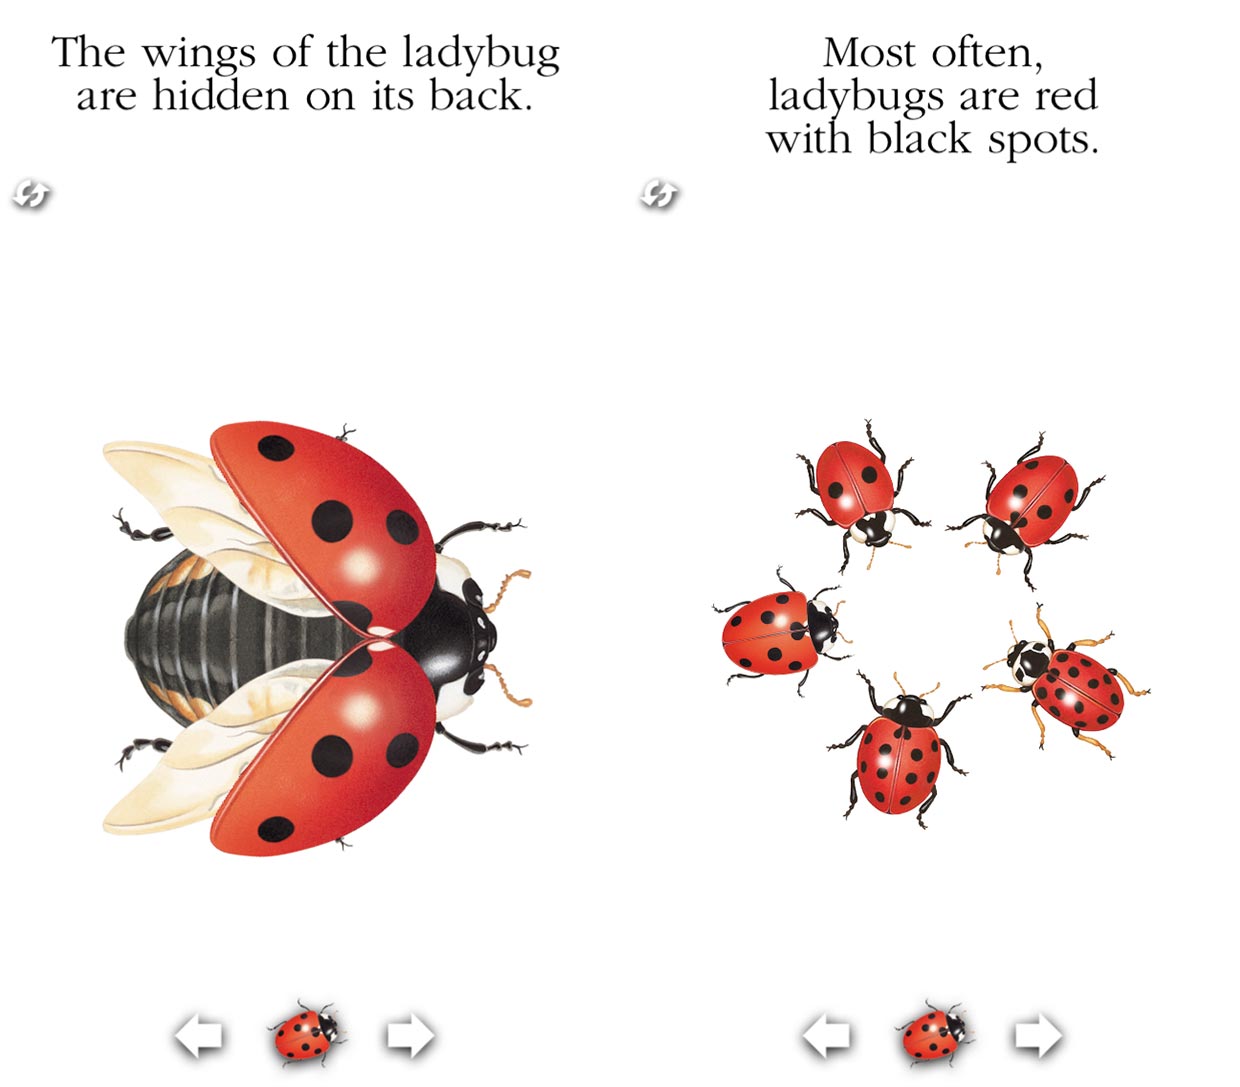 Ladybug for iPhone and iPad review: Learn about ladybugs in a fun and